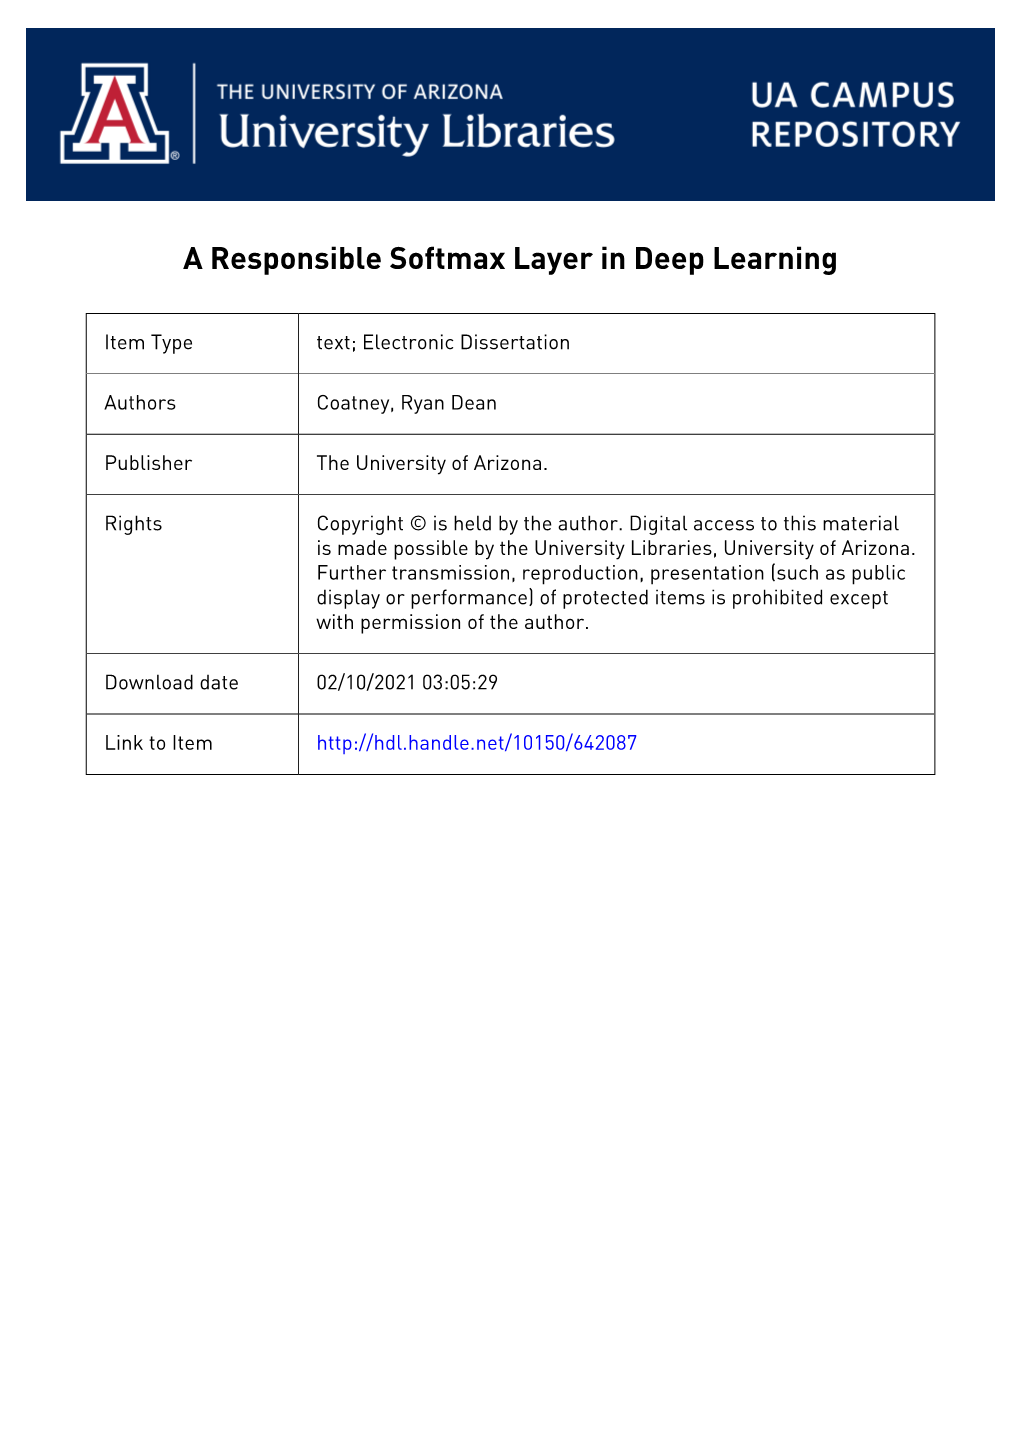 A Responsible Softmax Layer in Deep Learning